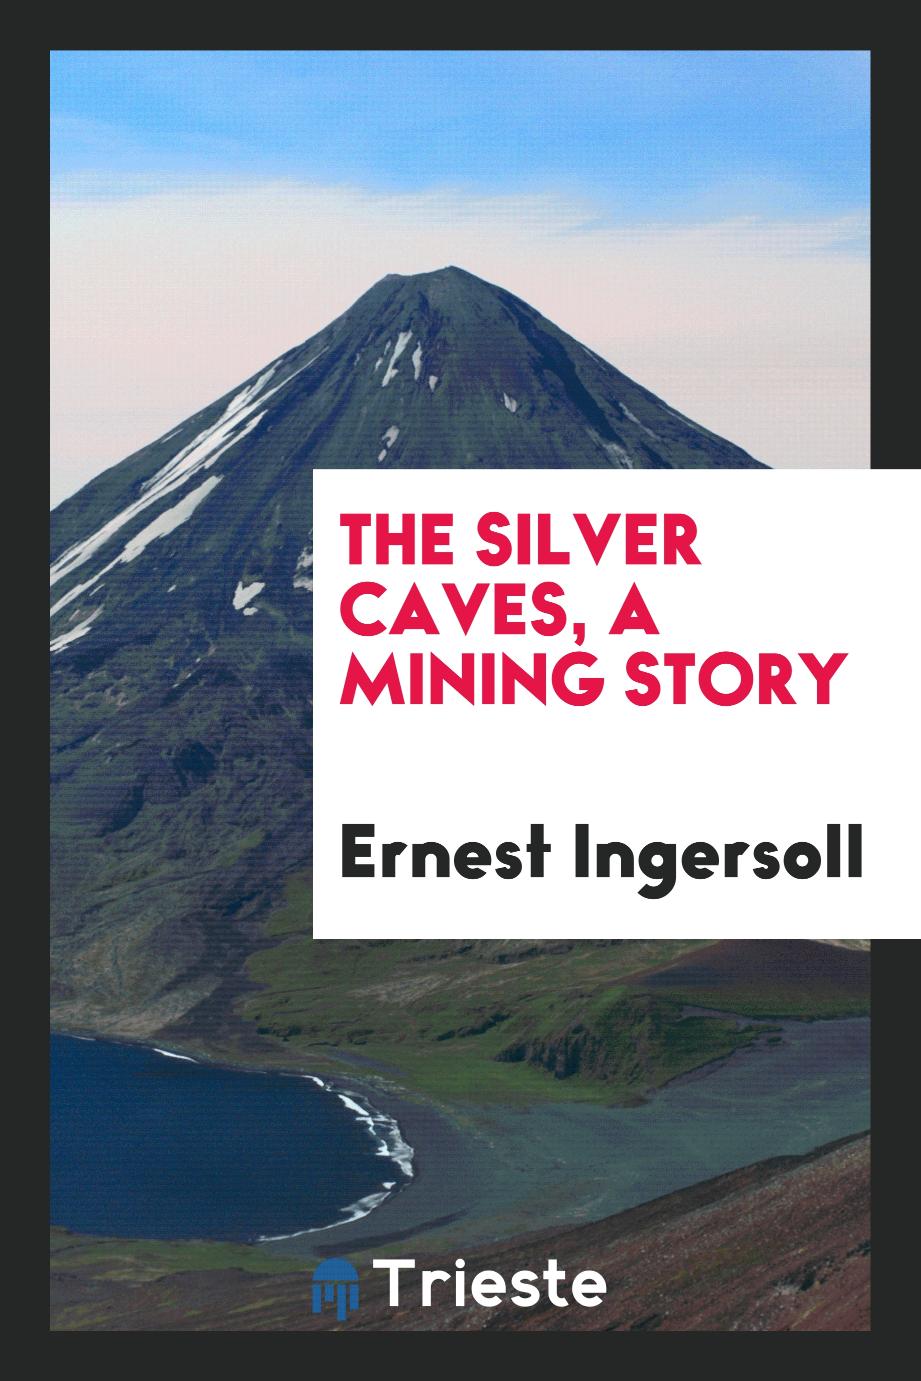 The silver caves, a mining story